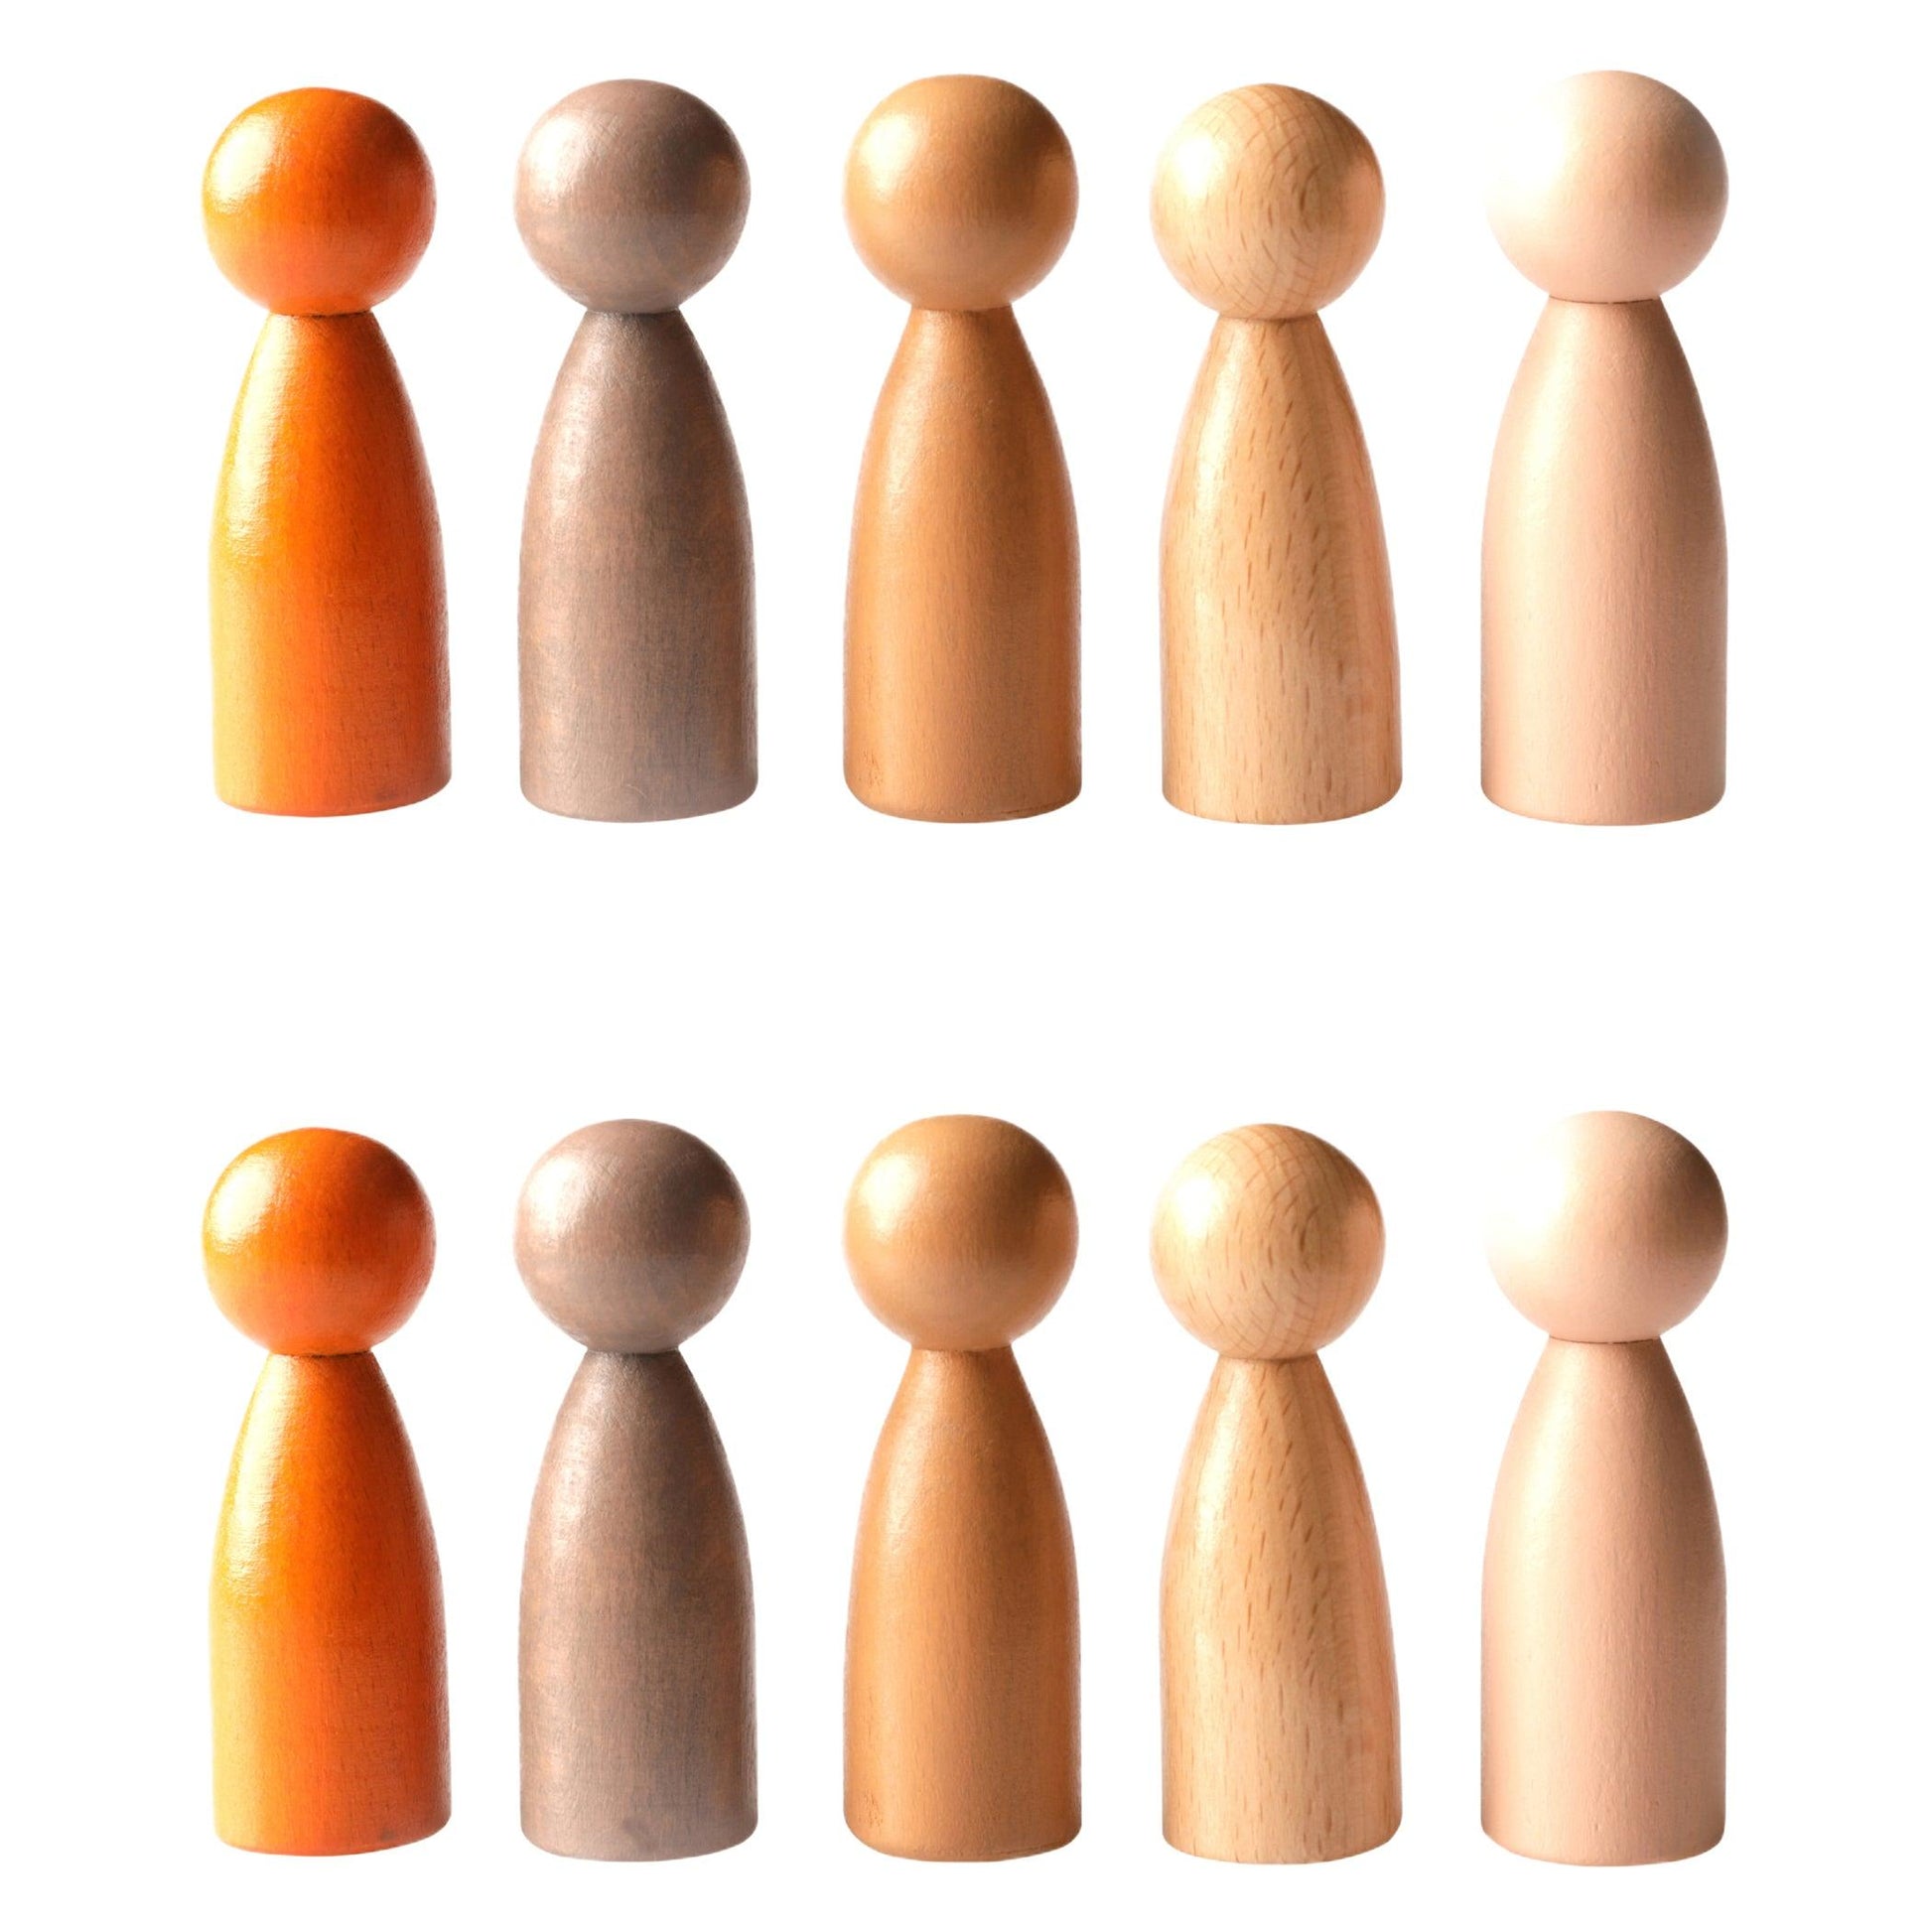 Peg People of the World Wooden People - Set of 10 - Ages 12m+ - Loomini